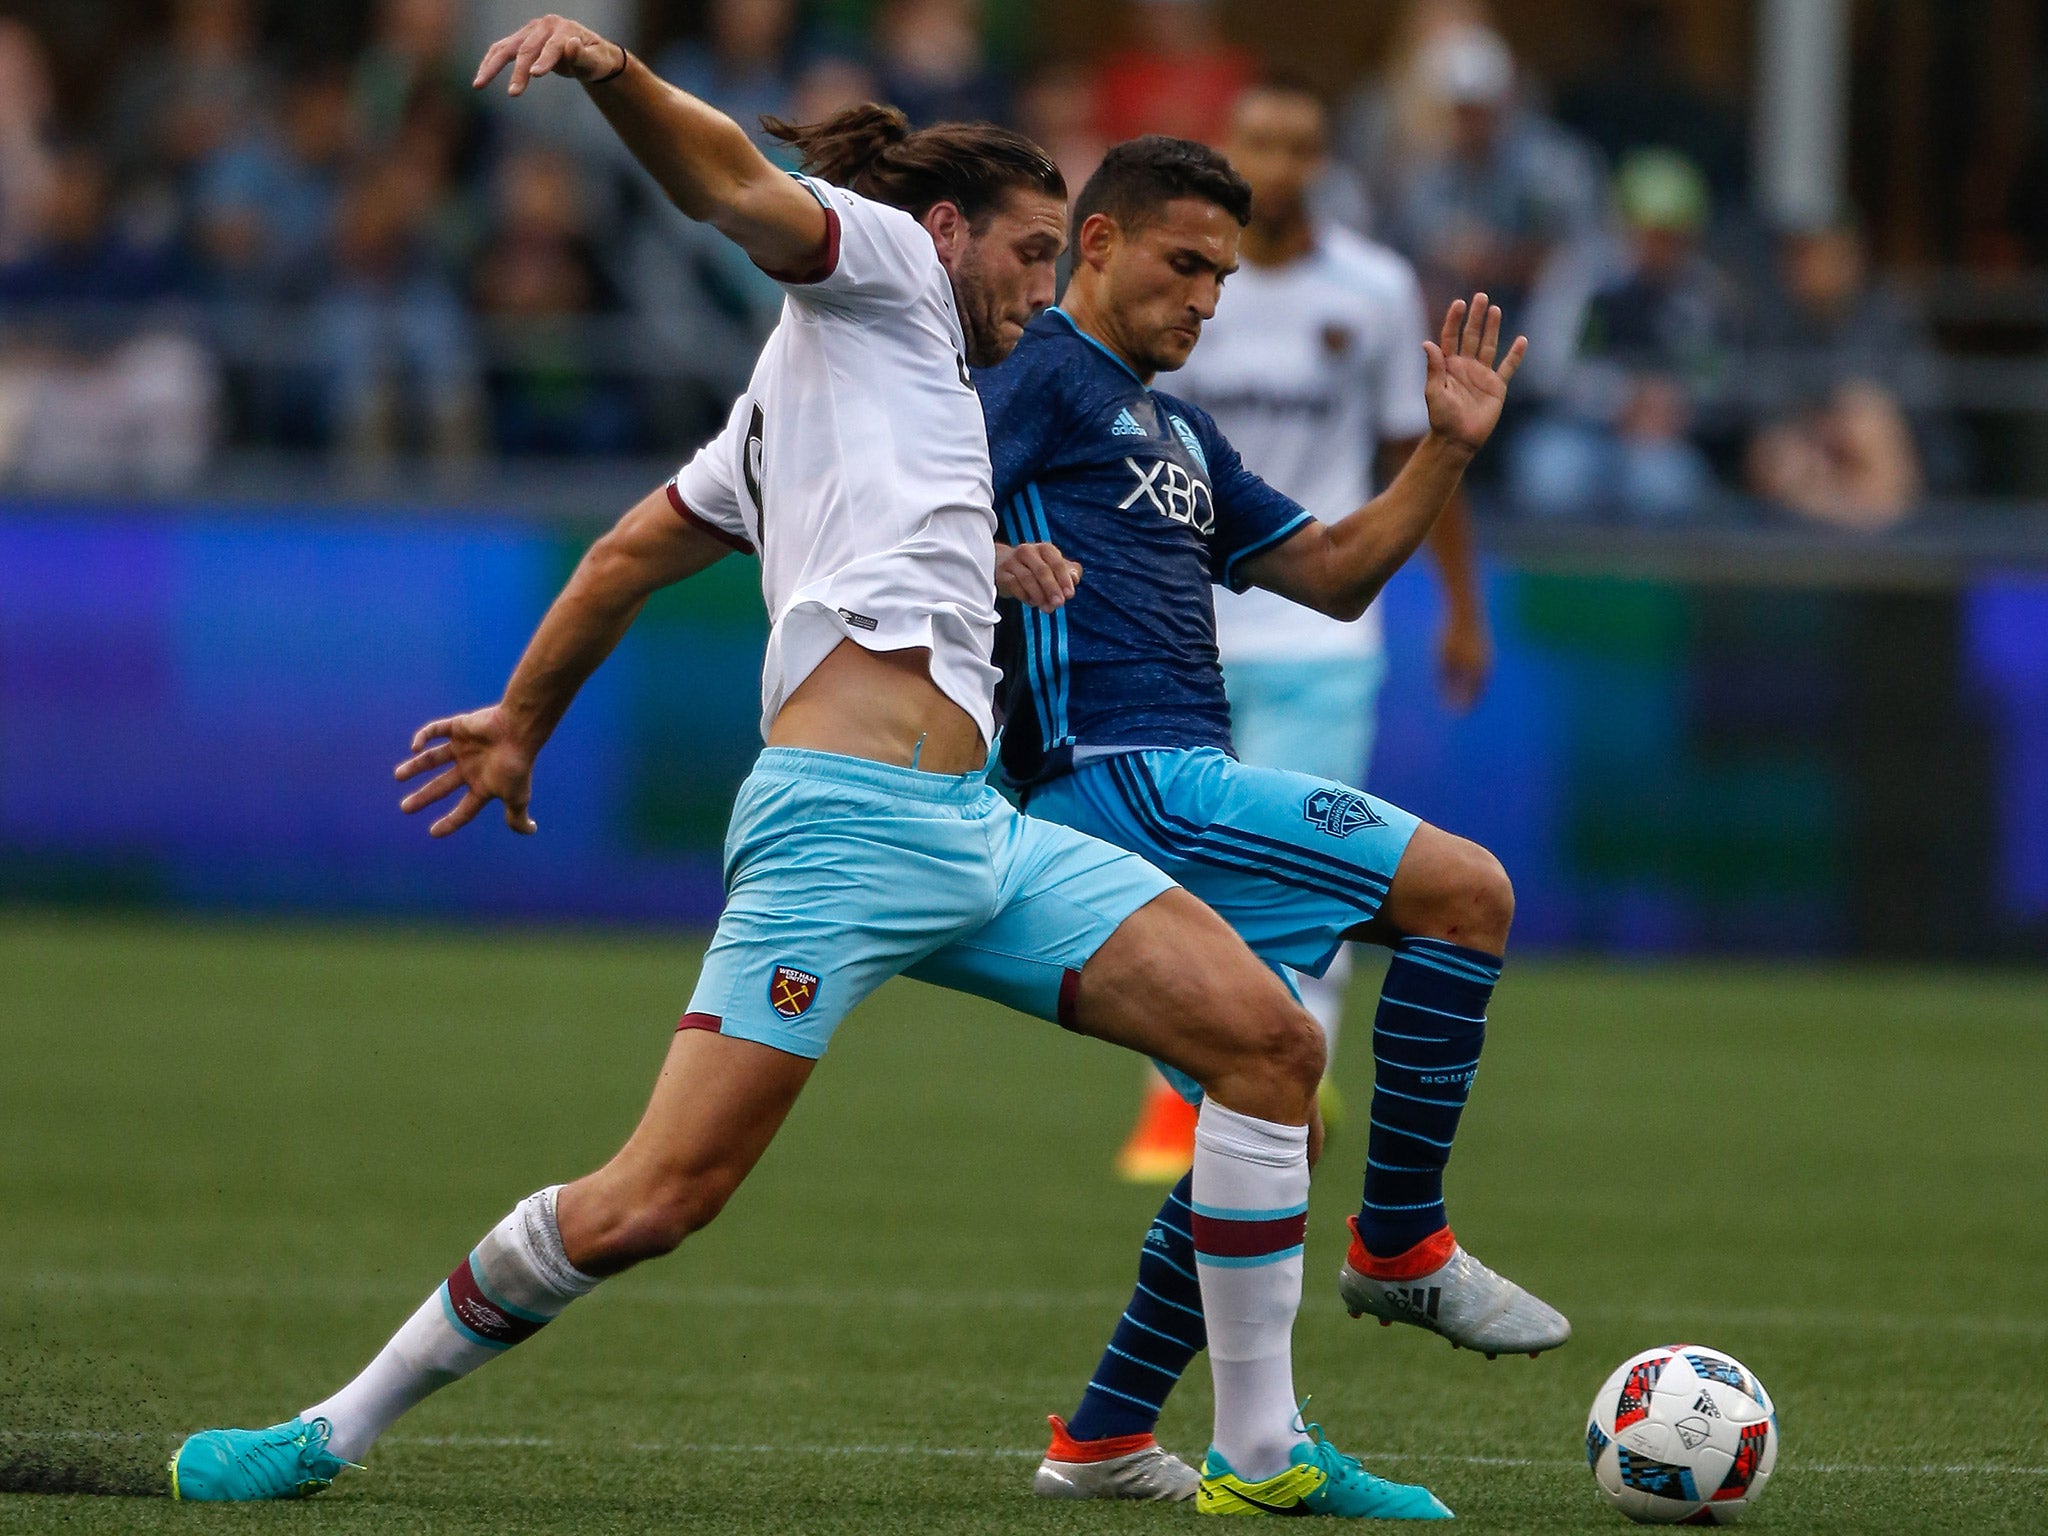 Andy Carrolll started for West Ham in the 3-0 loss to Seattle Sounders